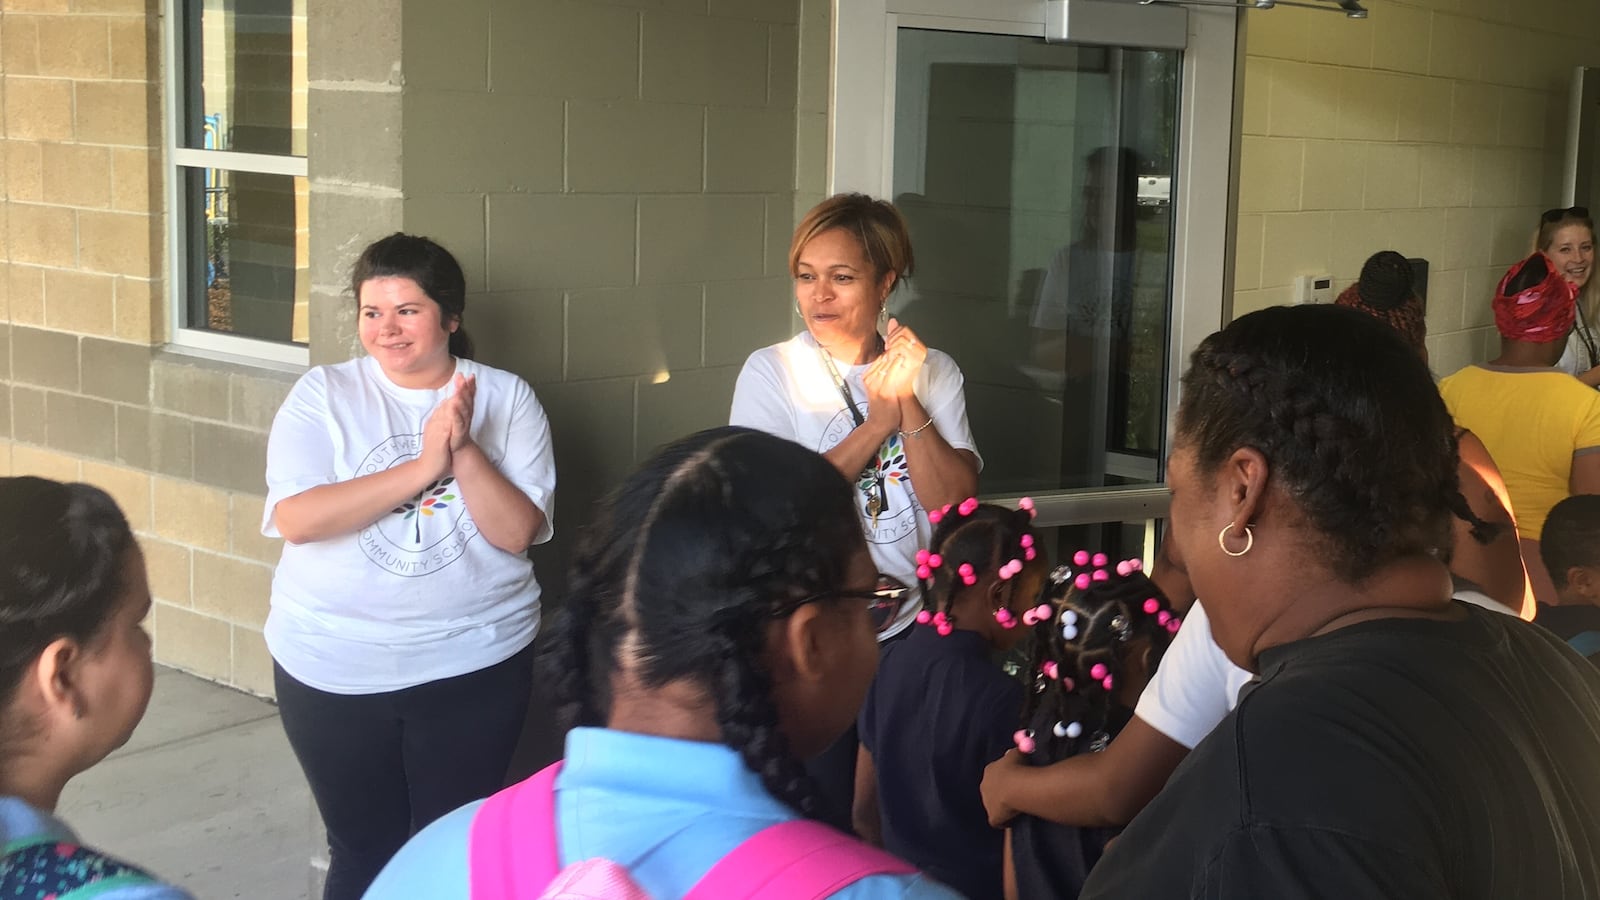 Principal Kim Pritchett, left, welcomes students to the first day of school at the Southwest Detroit Community School. She is the latest principal who hopes to turn the school around.